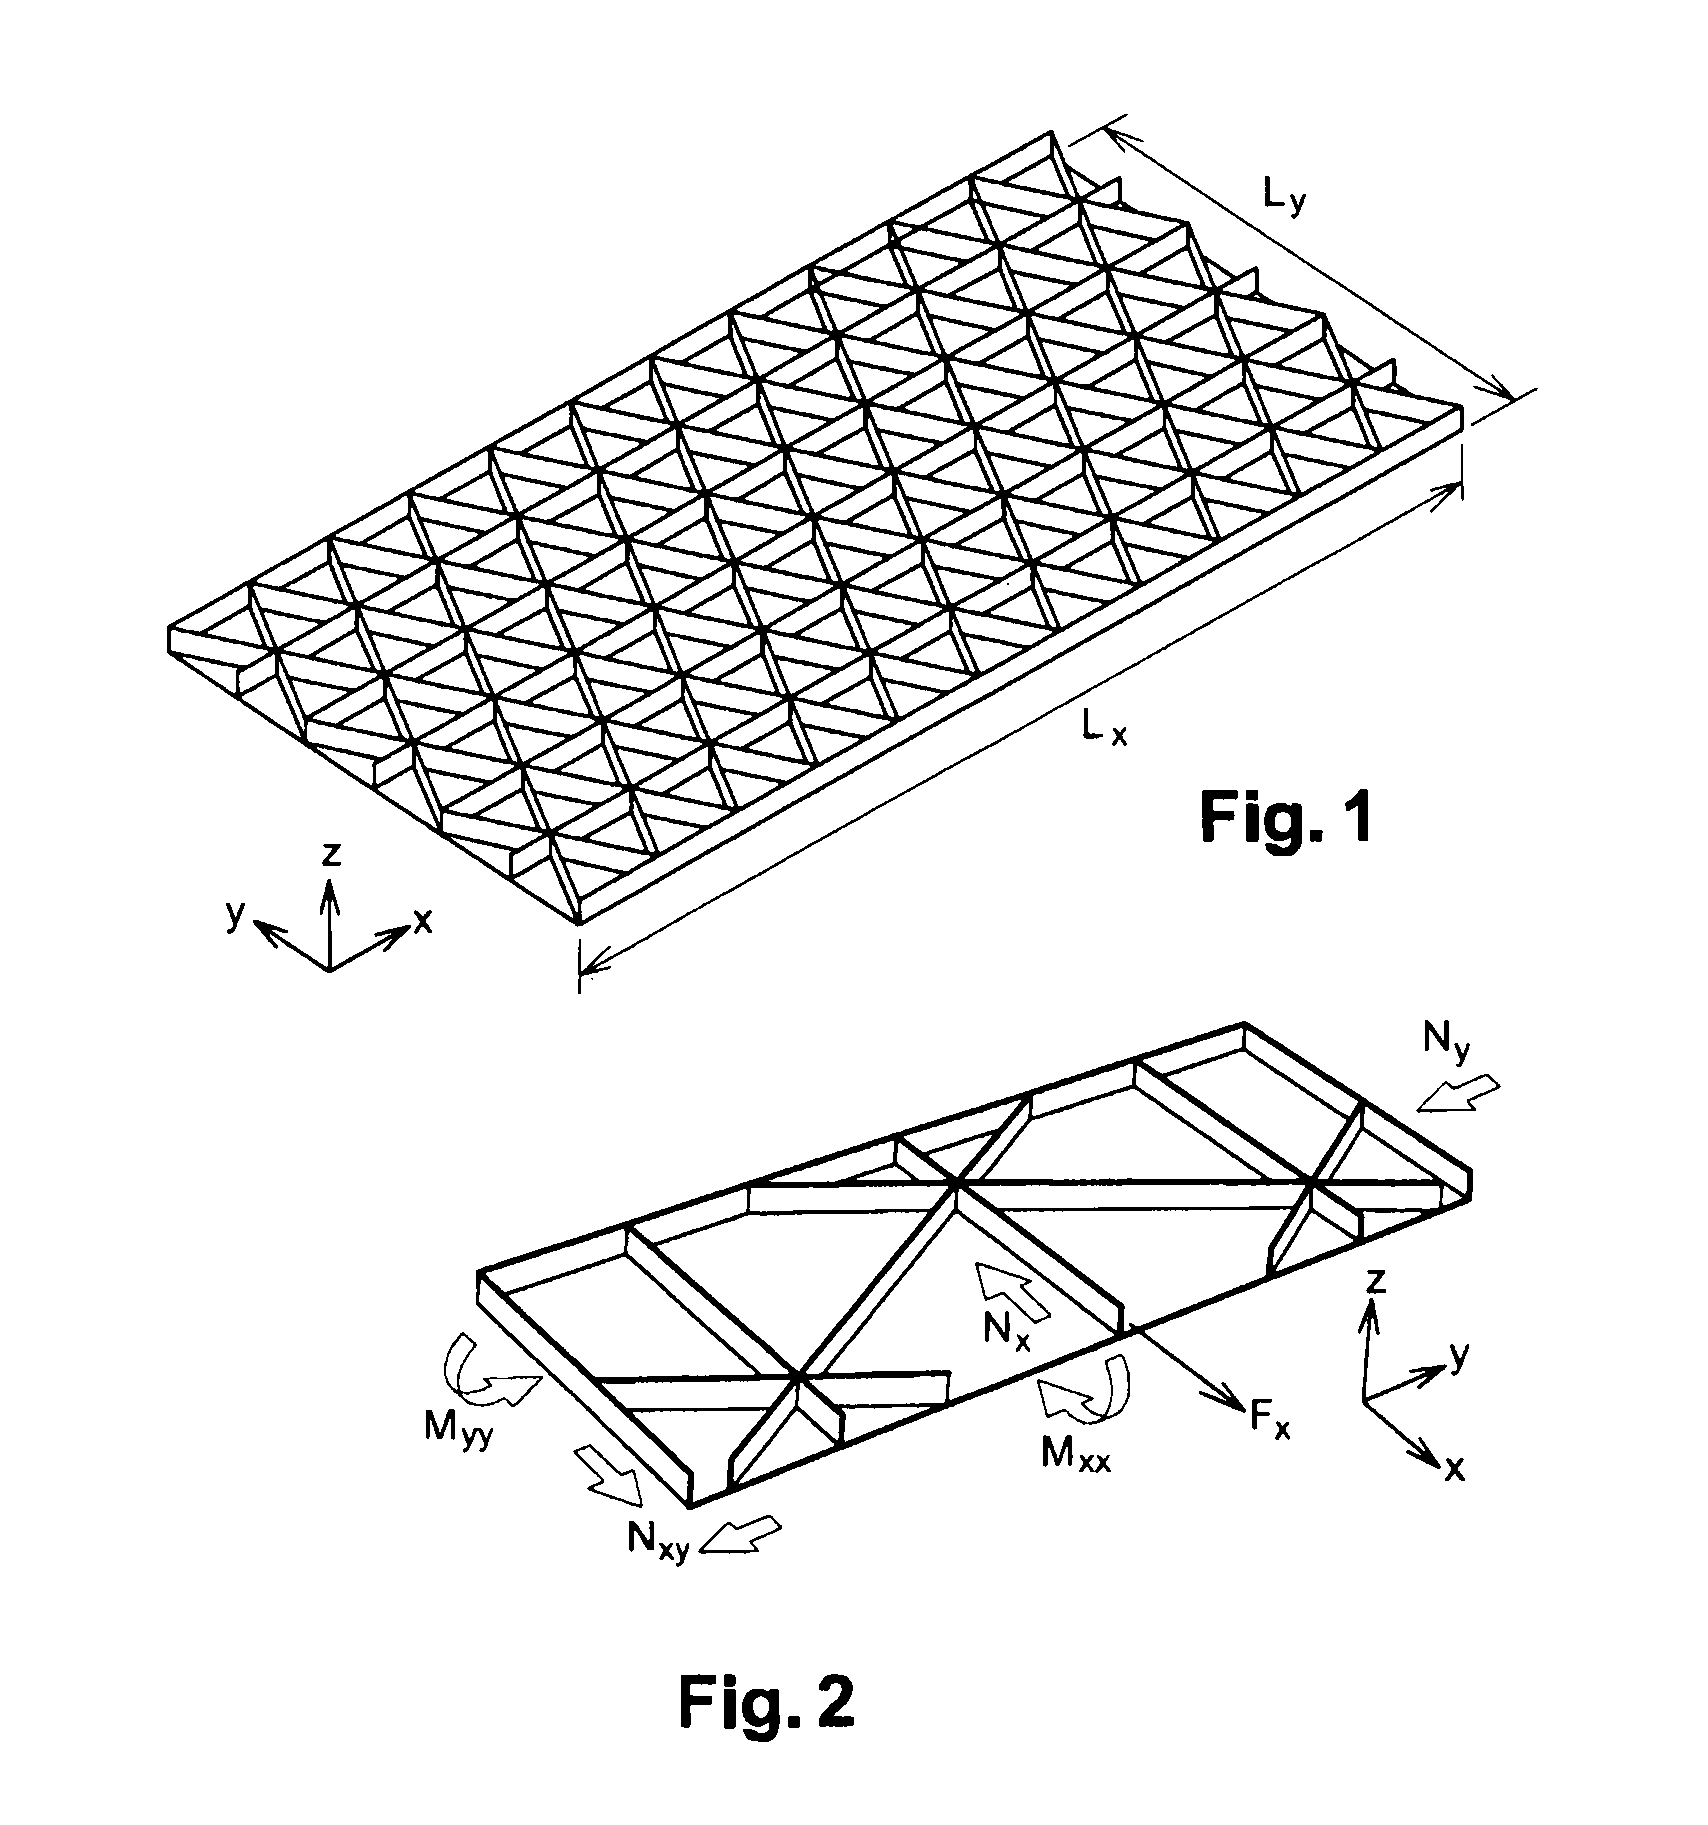 Method for the structural analysis of panels consisting of an isotropic material and stiffened by triangular pockets